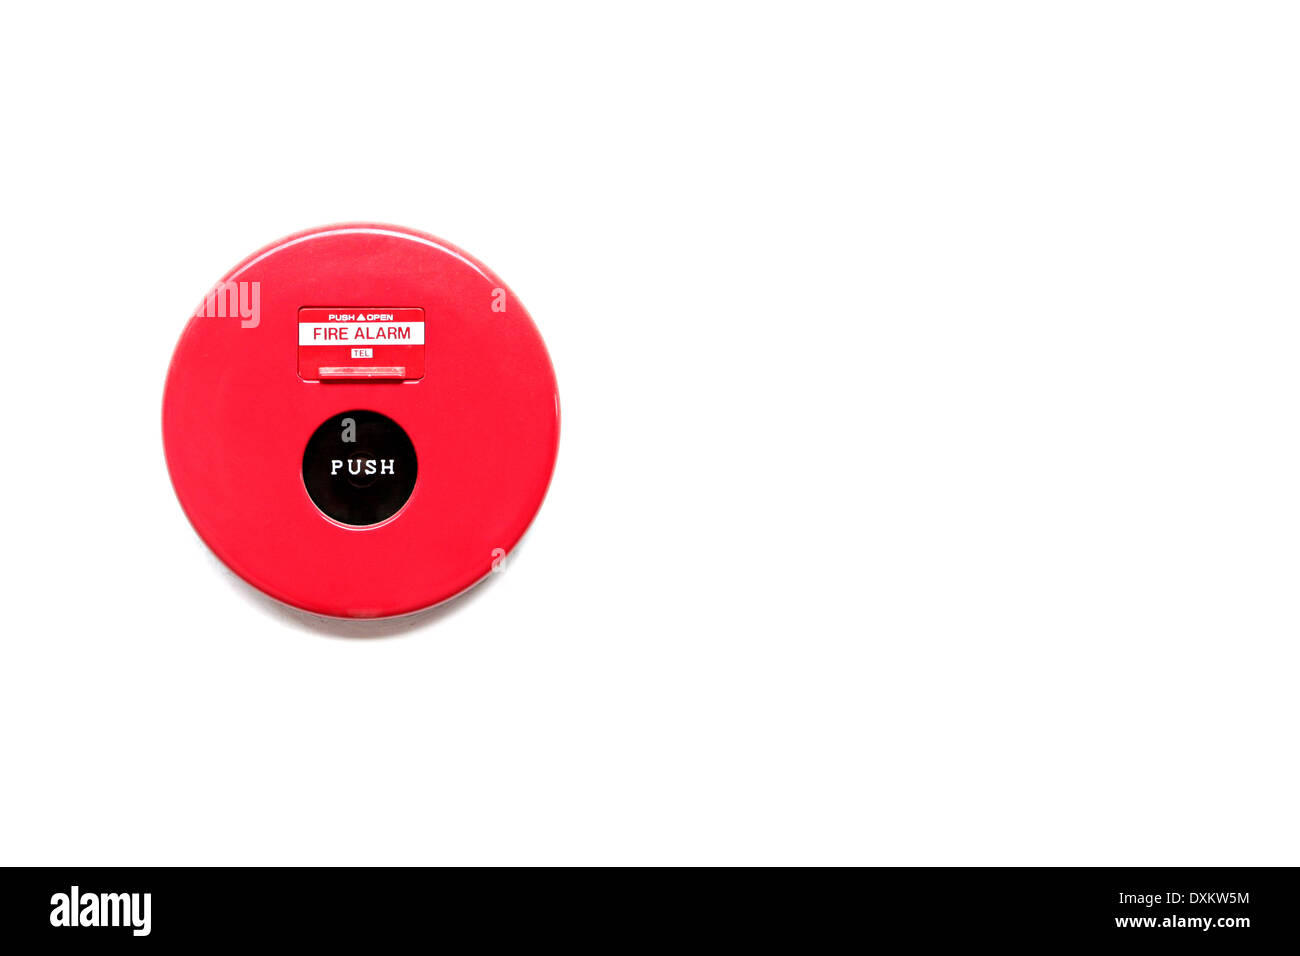 Fire Alarms tool isolated on white background. Stock Photo